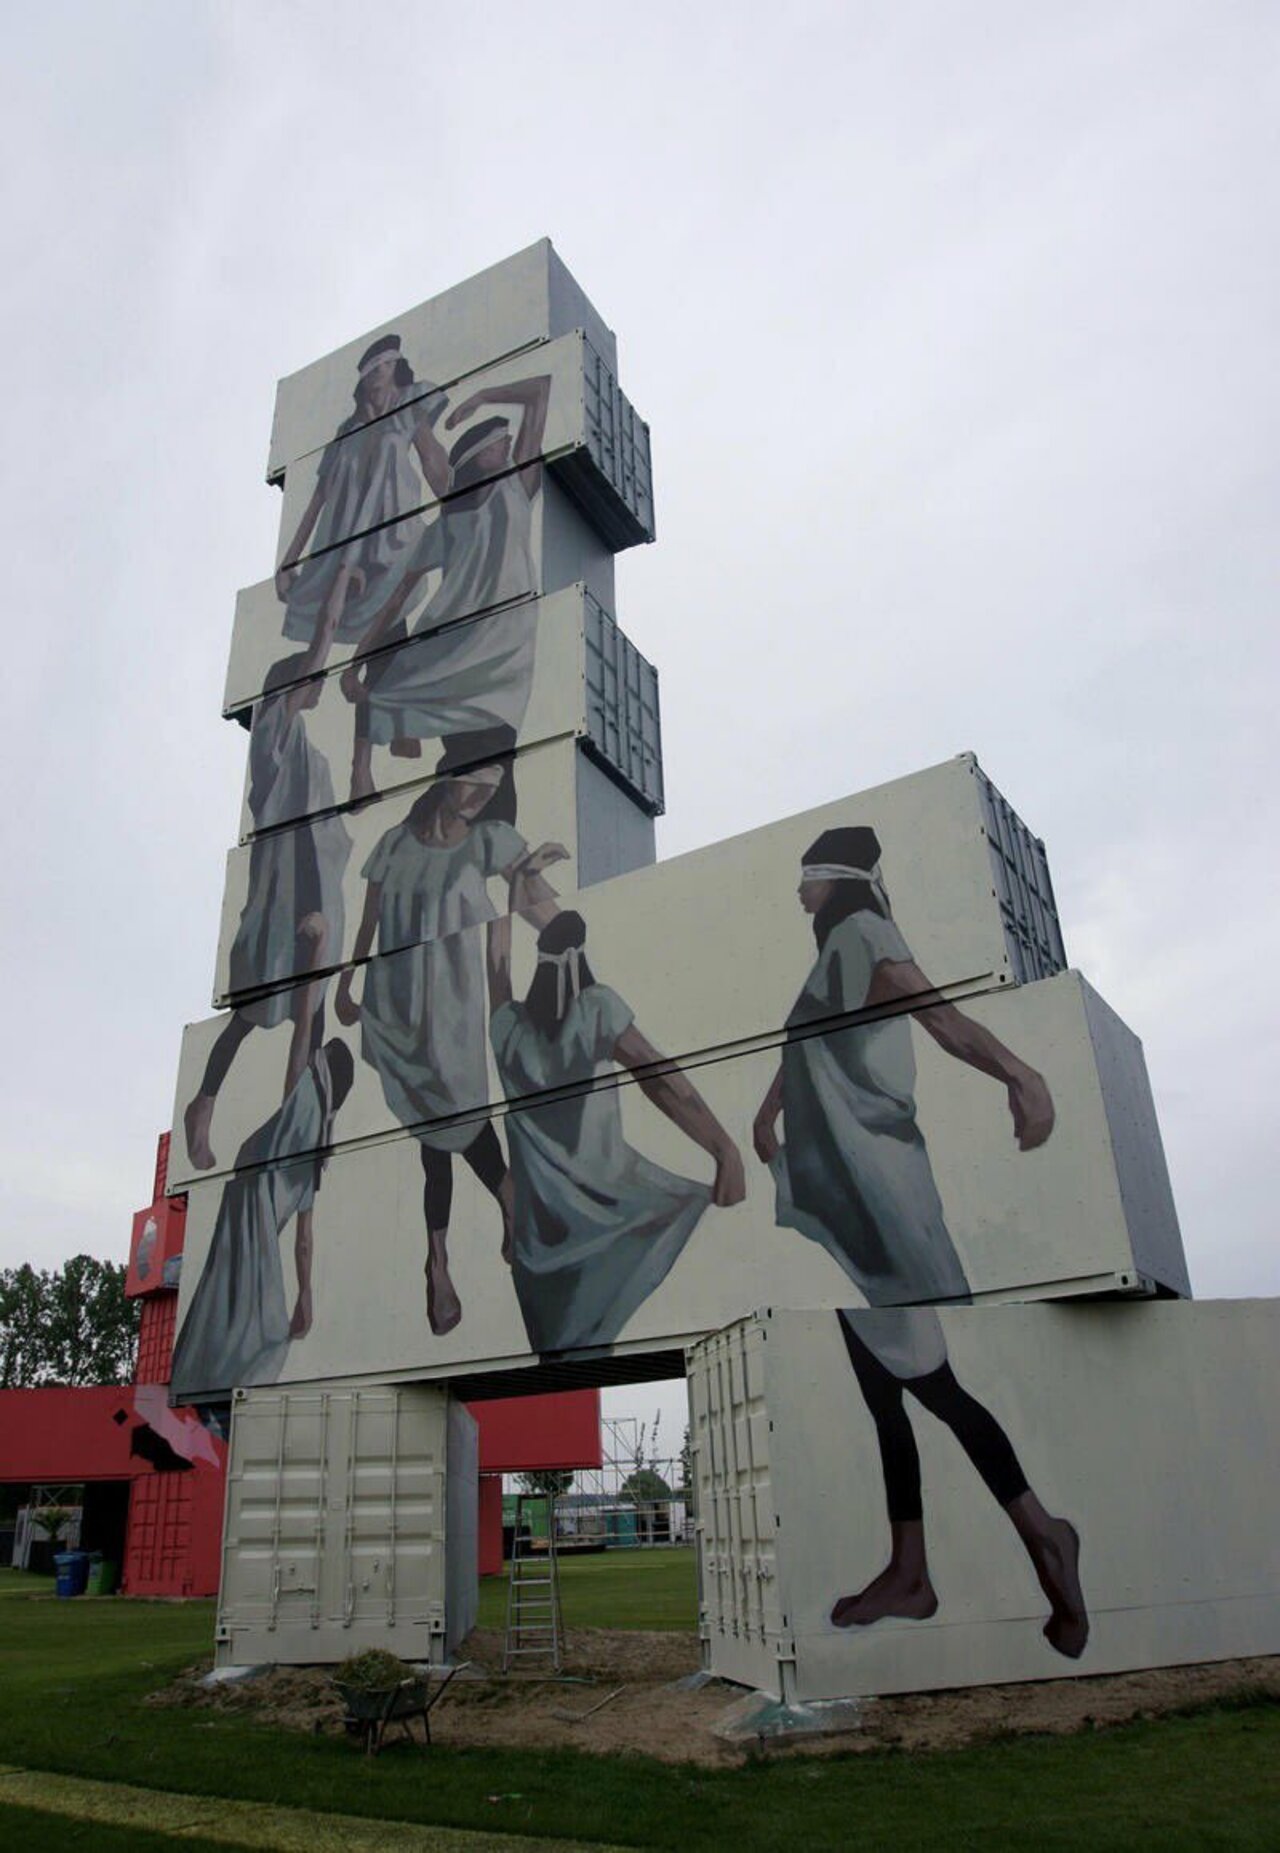 Monumental realistic mural artwork by Tamara Djurovic, who goes by the artist name Hyuro. Murals that depict the human struggle blended within the urban architecture, from Brazil to Spain. Heart wrenching themes and subjects. #StreetArt #ArteUrbano #Graffiti https://t.co/zC0FZfQt4l